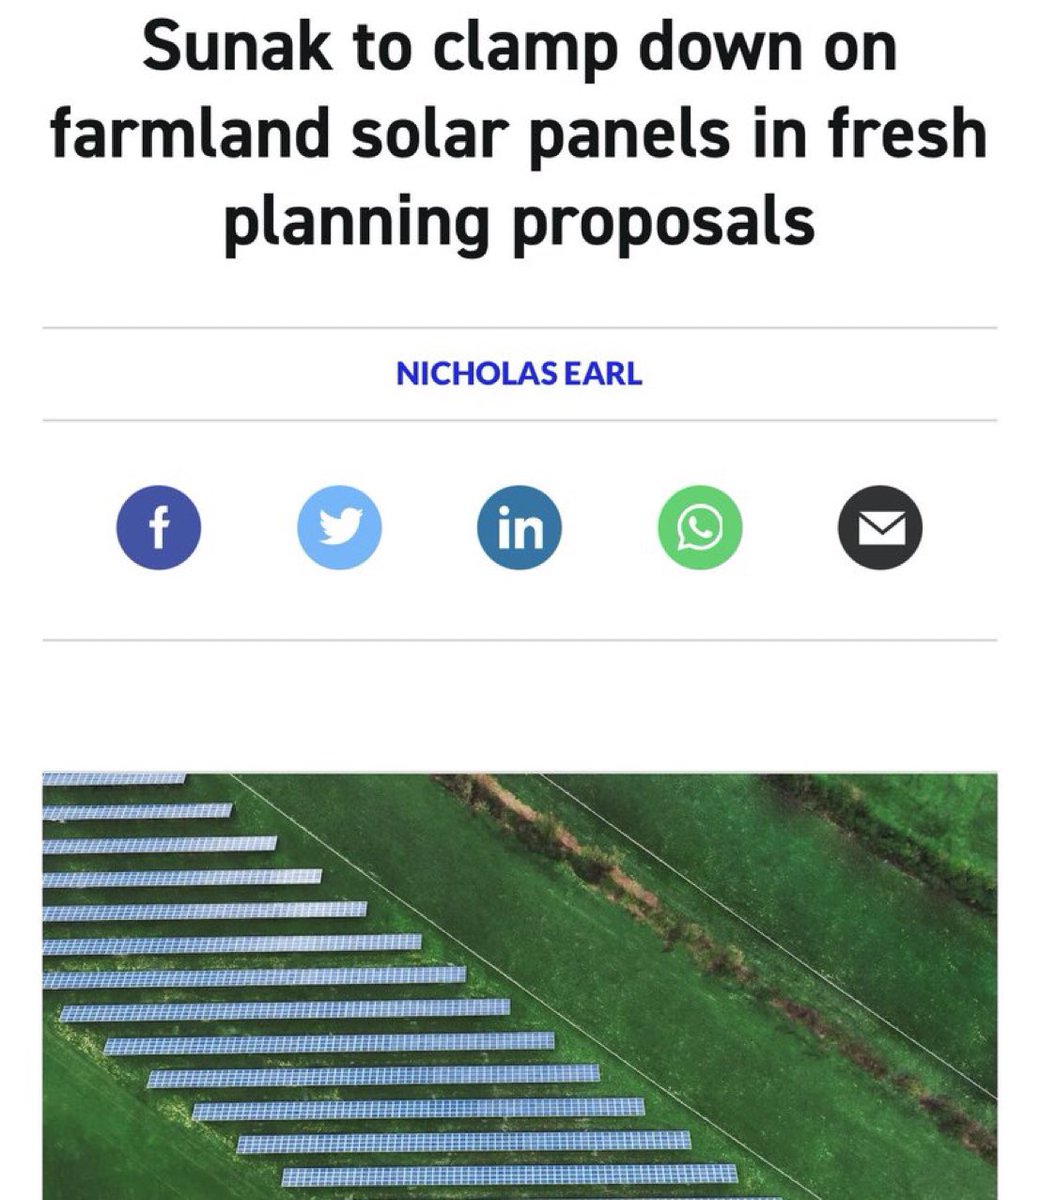 Food security must be protected. Solar panels should not be put on prime agricultural land. Put them on rooftops or brownfield land.